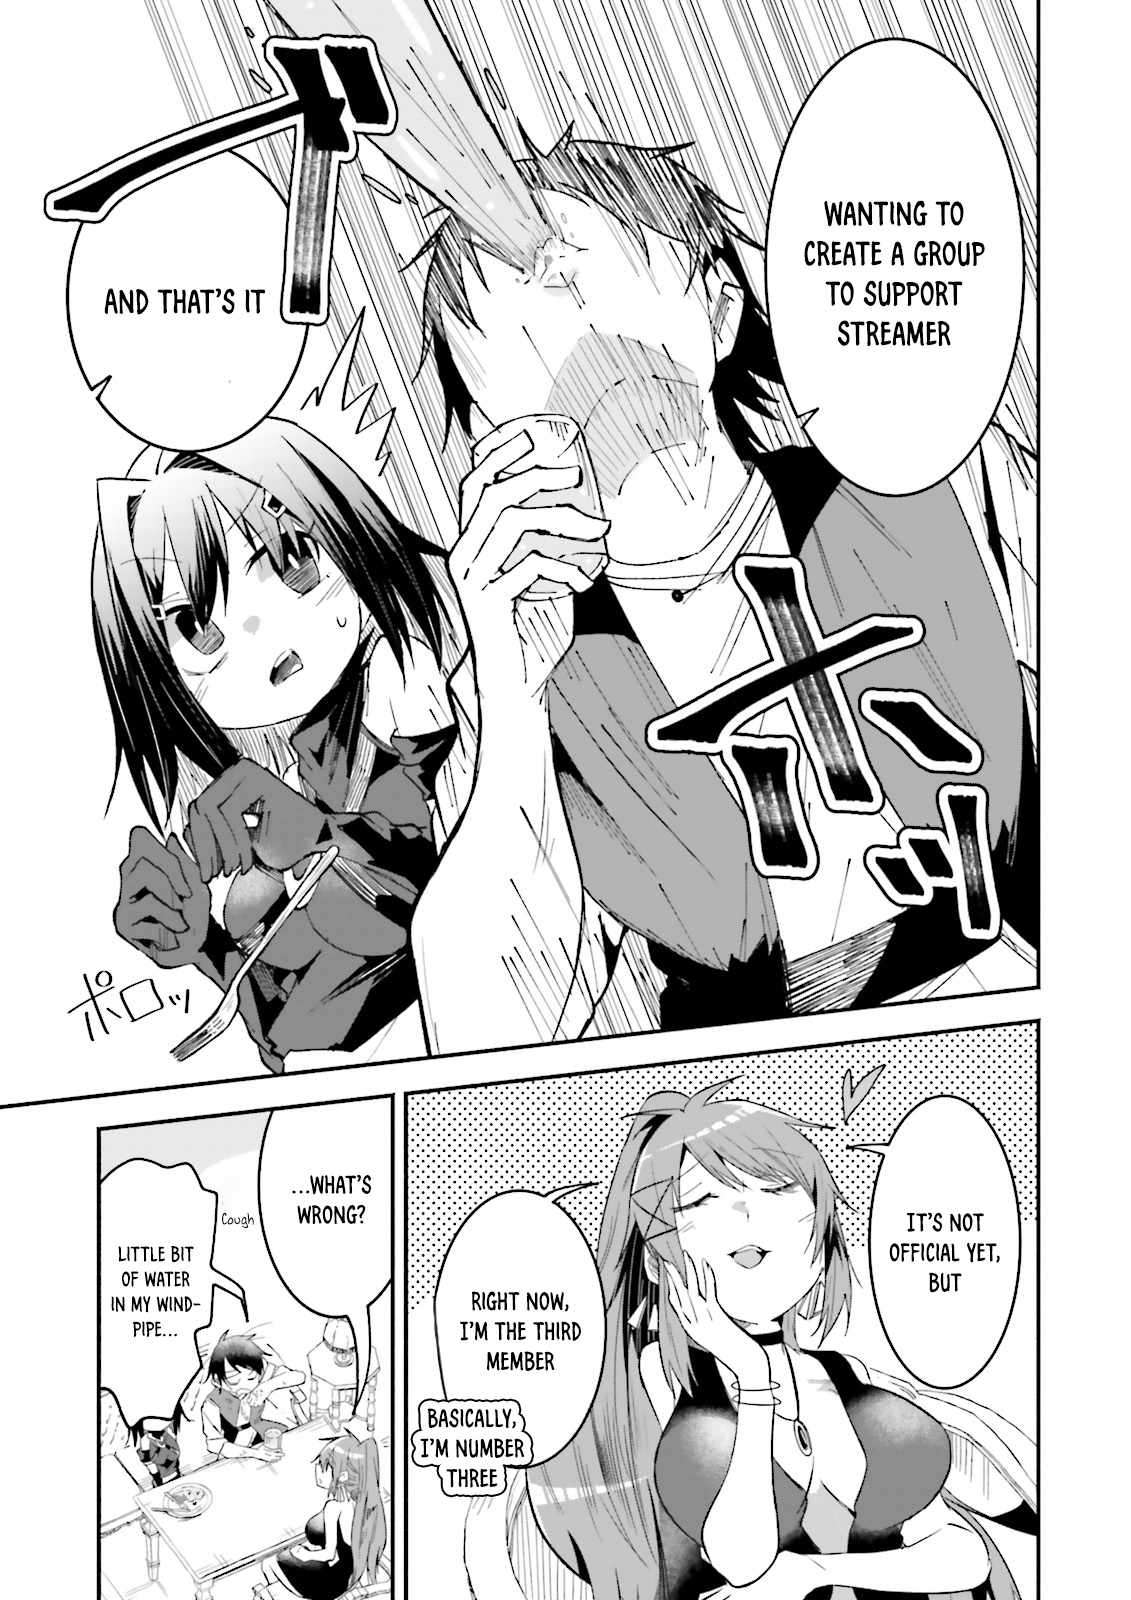 The Case In Which Streaming In Another World Led To The Creation Of A Massive Yandere Following - chapter 22 - #3